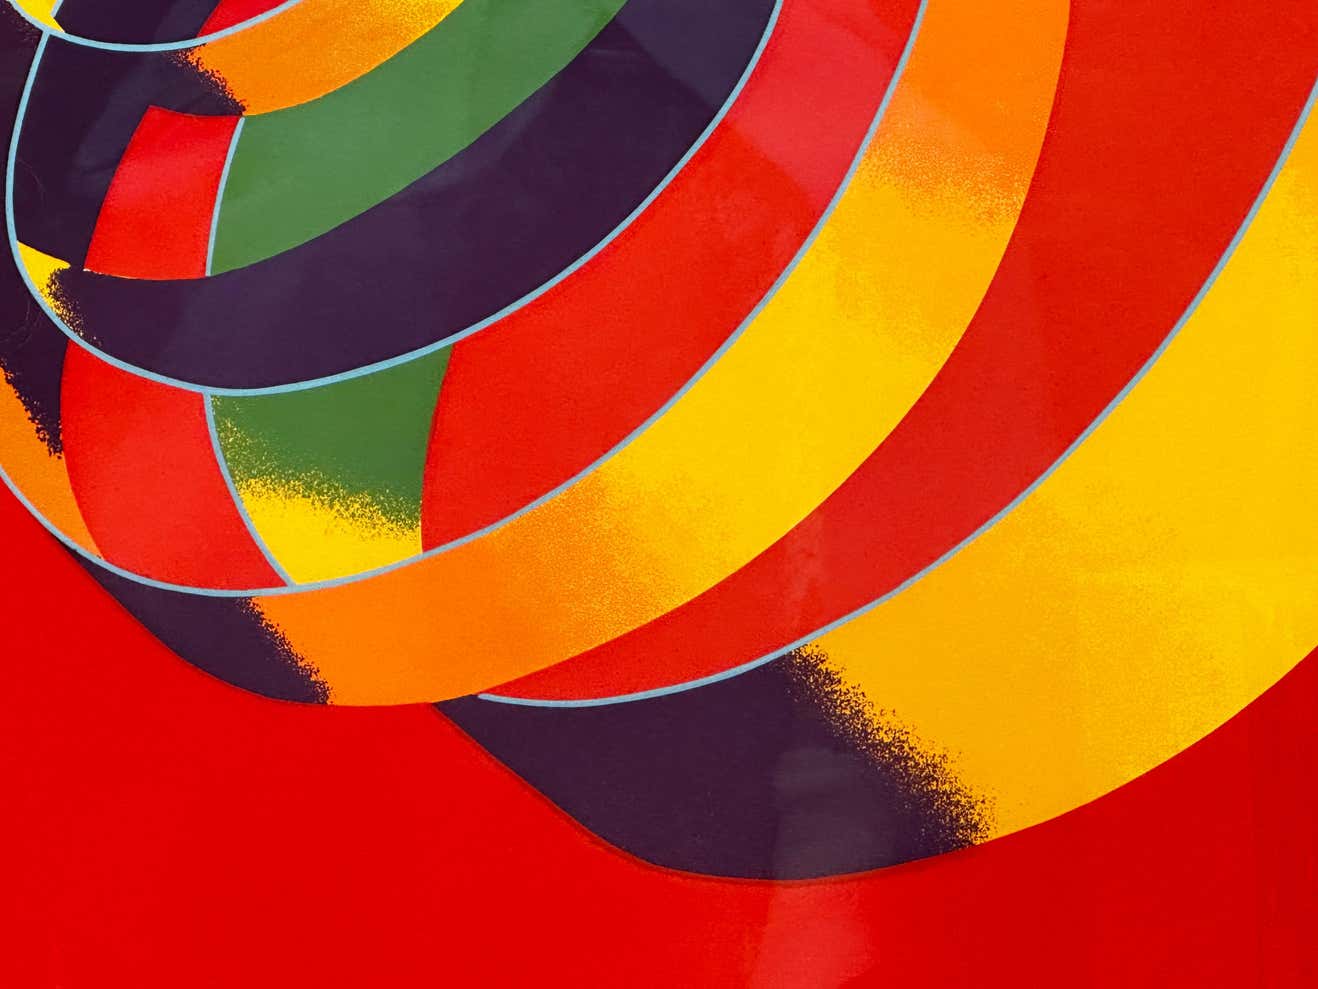 "Multicolour Spiral" Geometric Lithograph Abstract by Jack Brusca